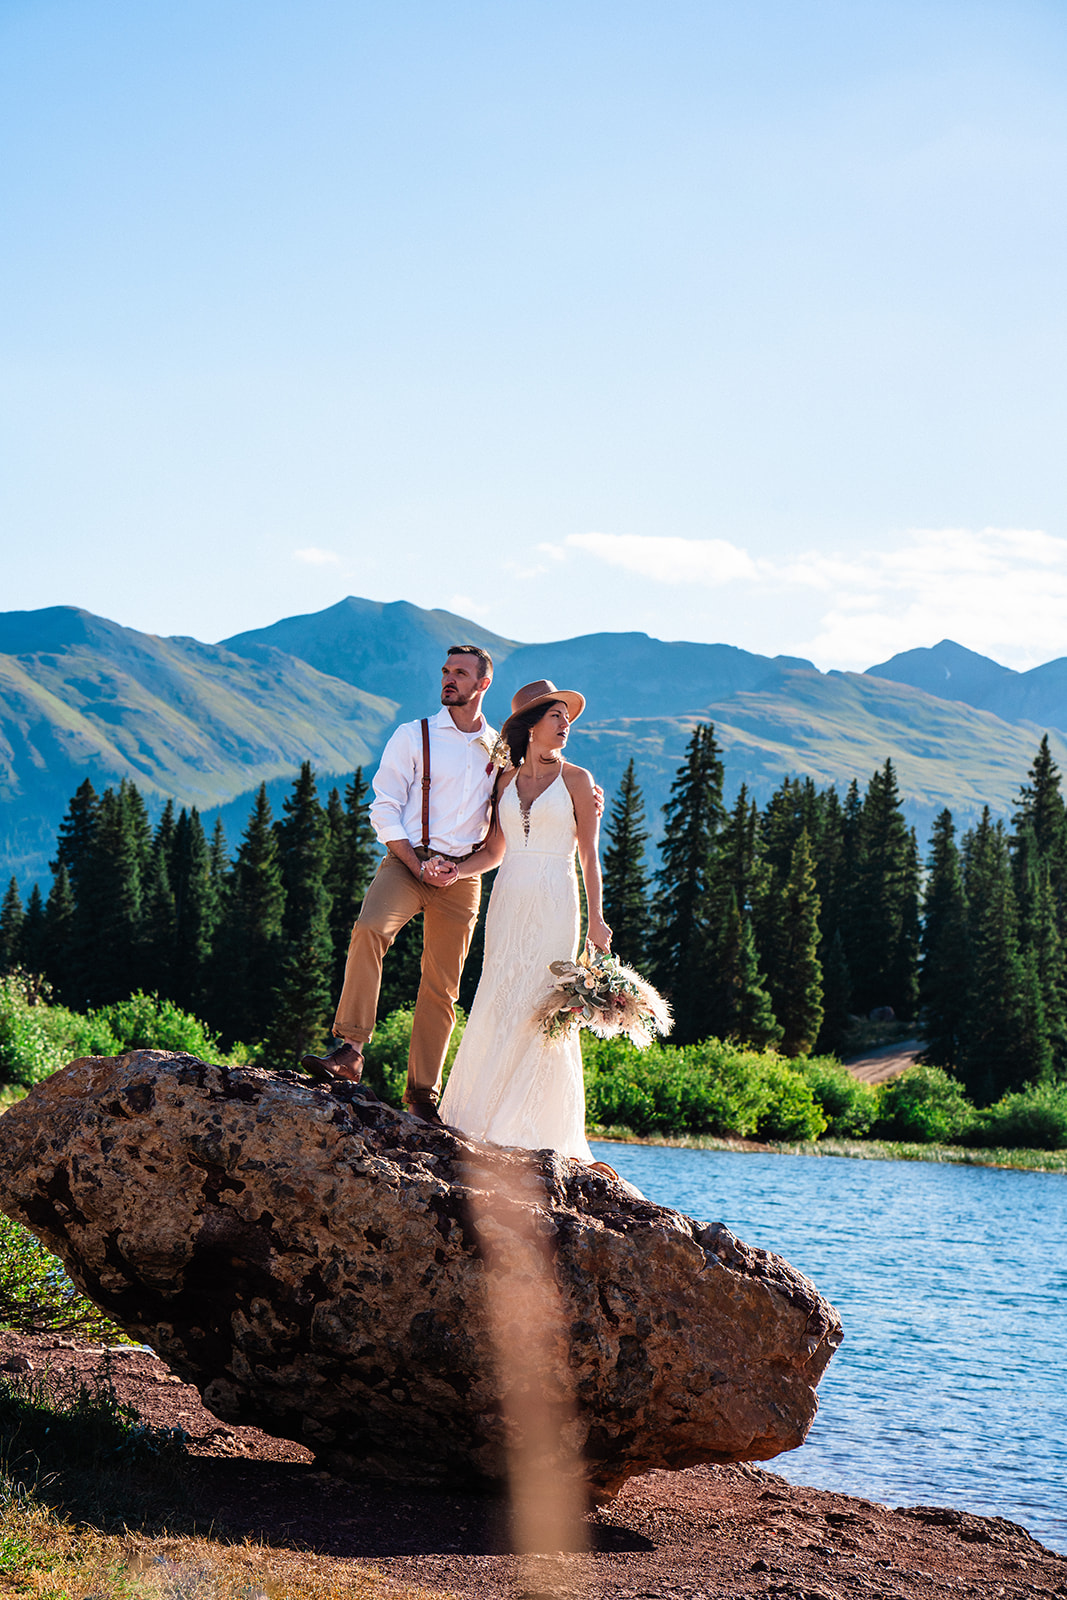 Adventerous San Juan Mountains Elopement with sunrise portraits and waterfall adventures